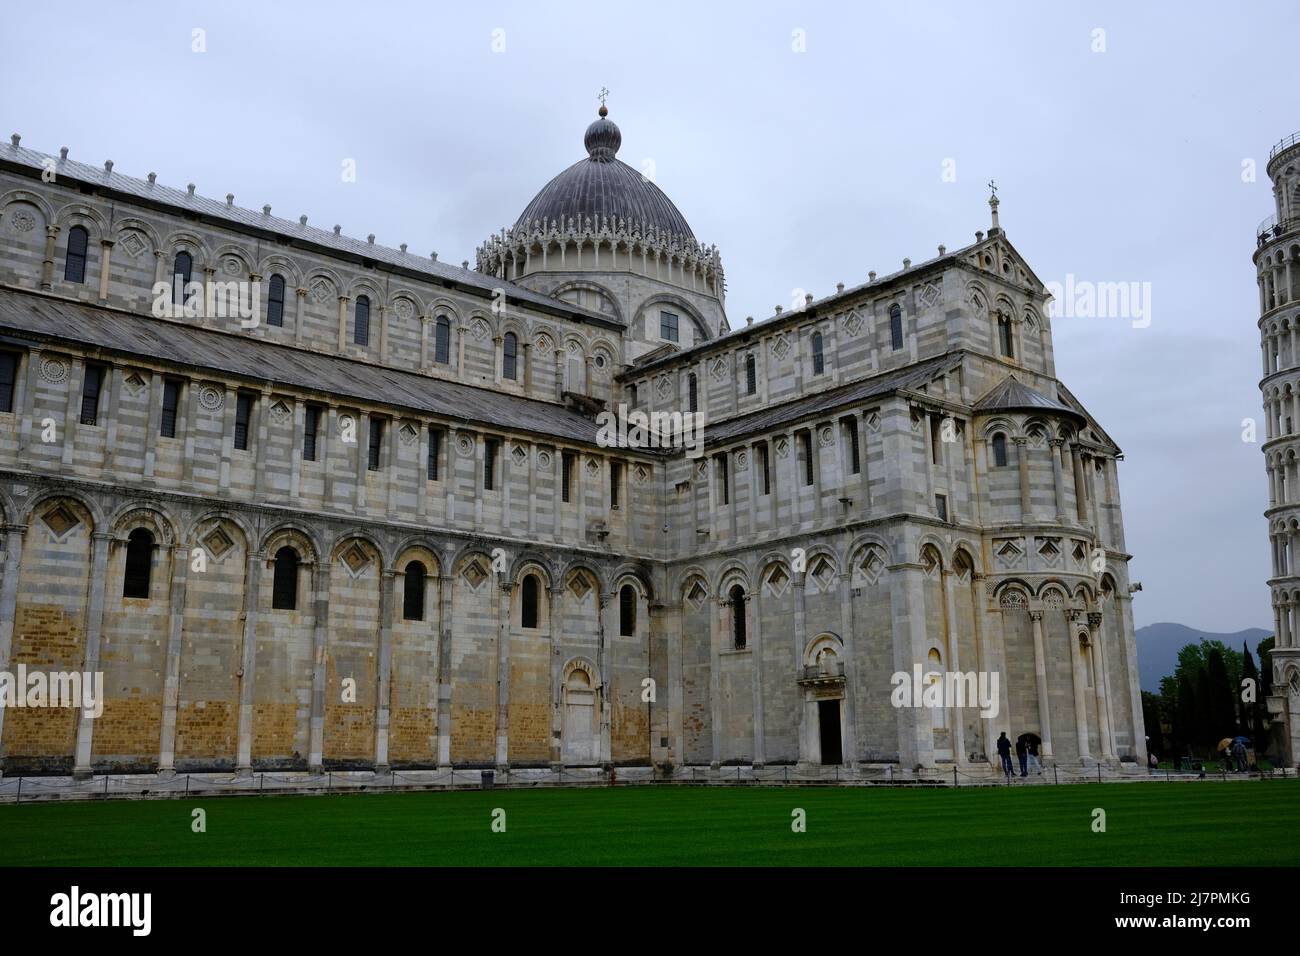 Visiting the Piazza dei Miracoli in Pisa, Italy on a cloudy day Stock Photo